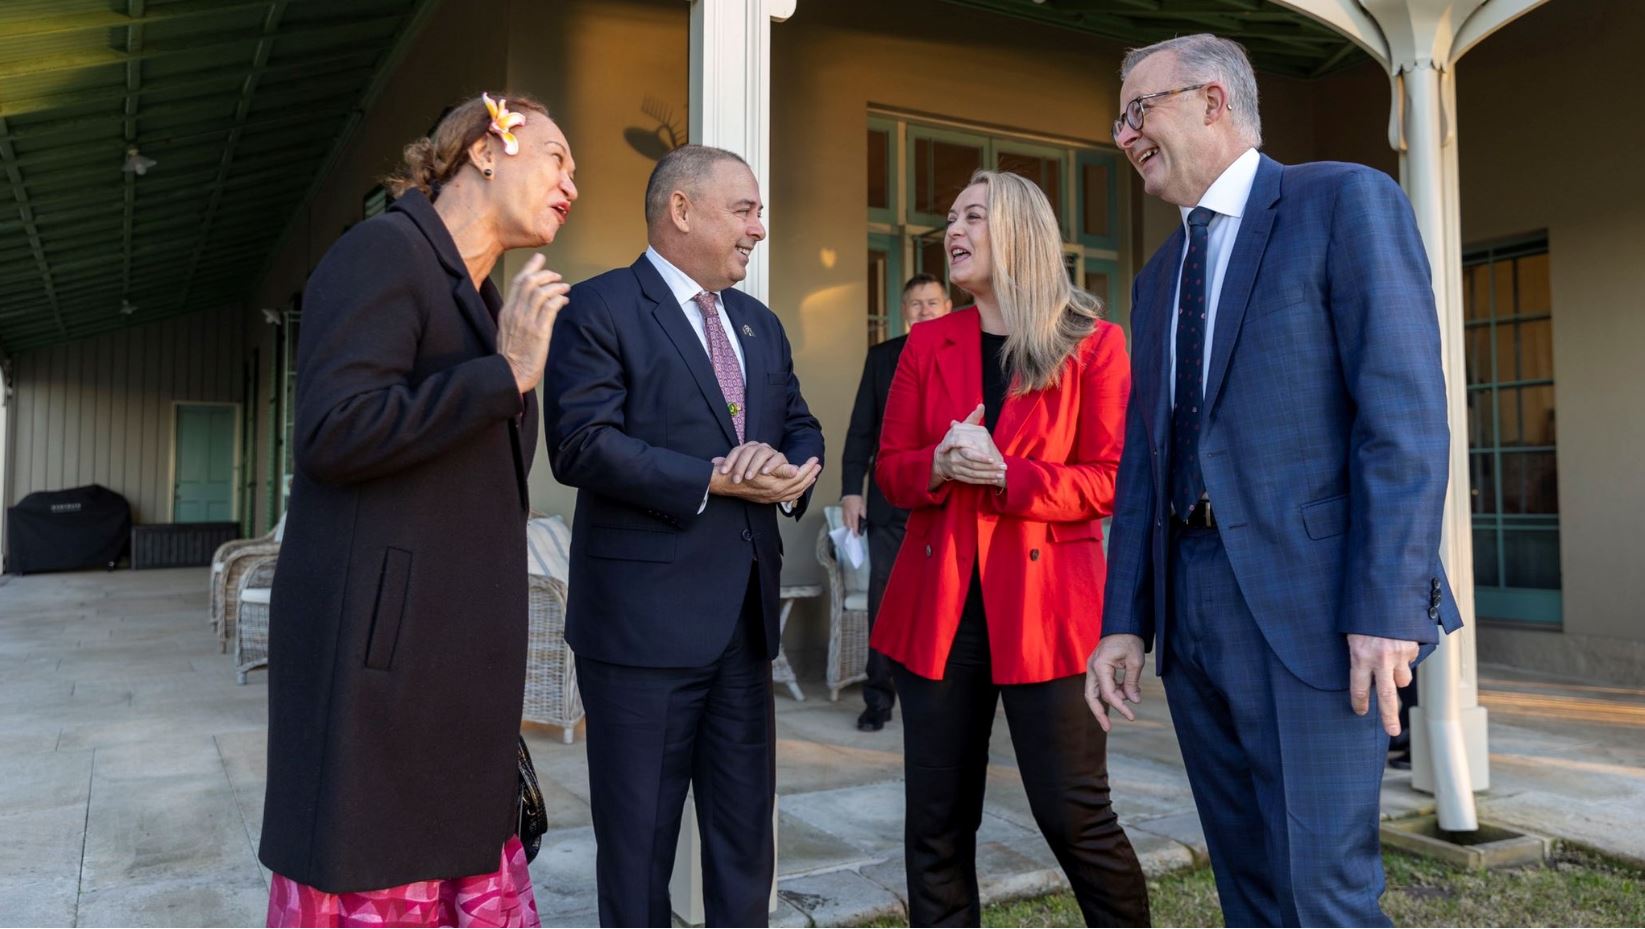 ‘We are stronger together’ – Australian Prime Minister Anthony Albanese